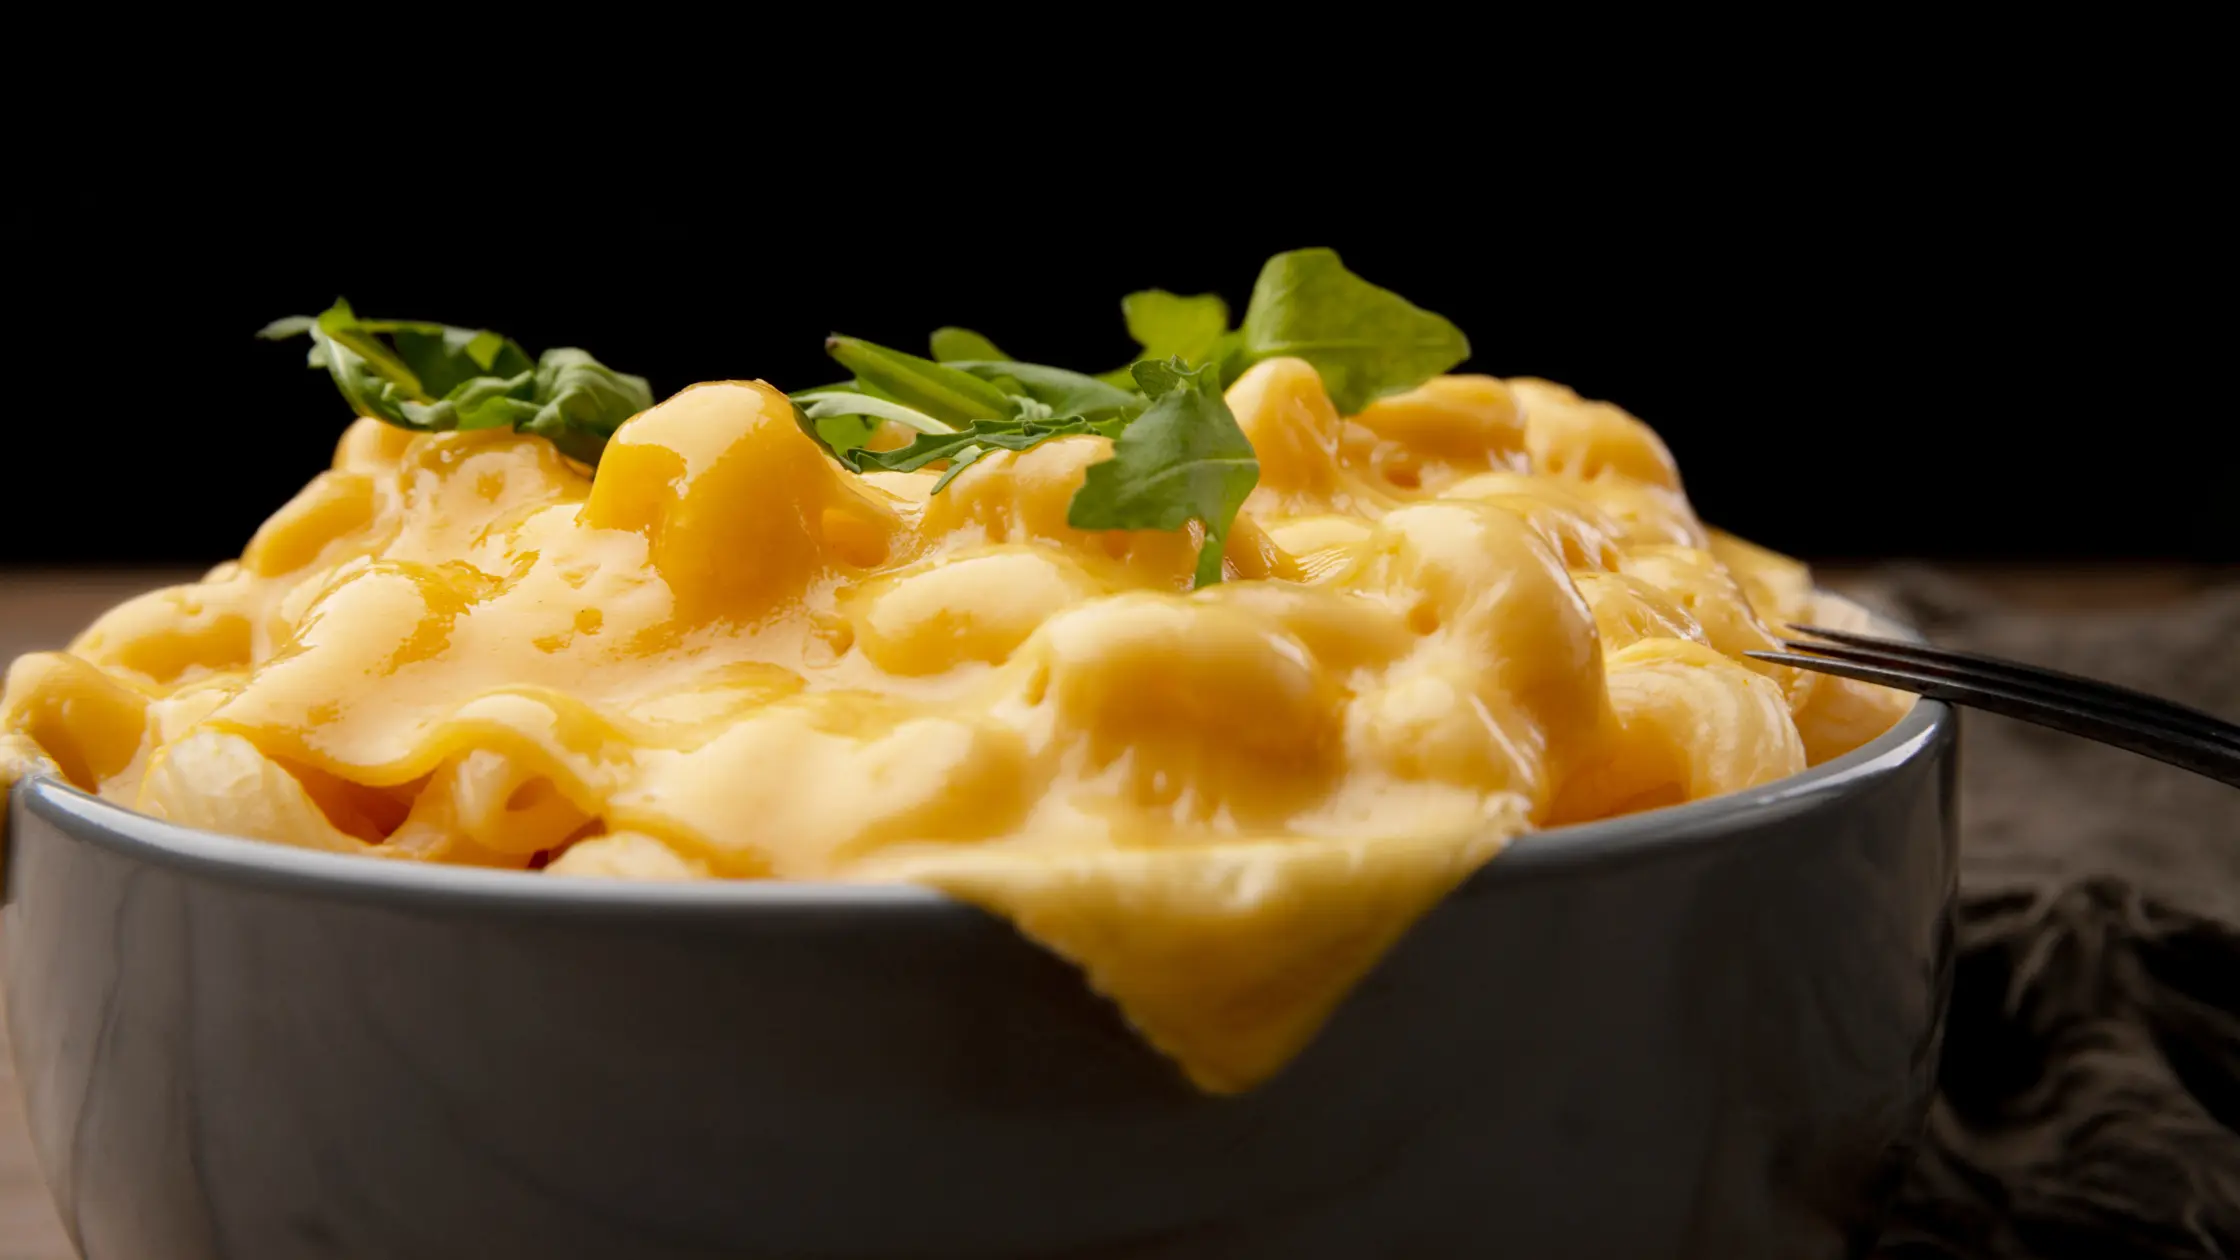 Mac and Cheese Recipe Ingredients